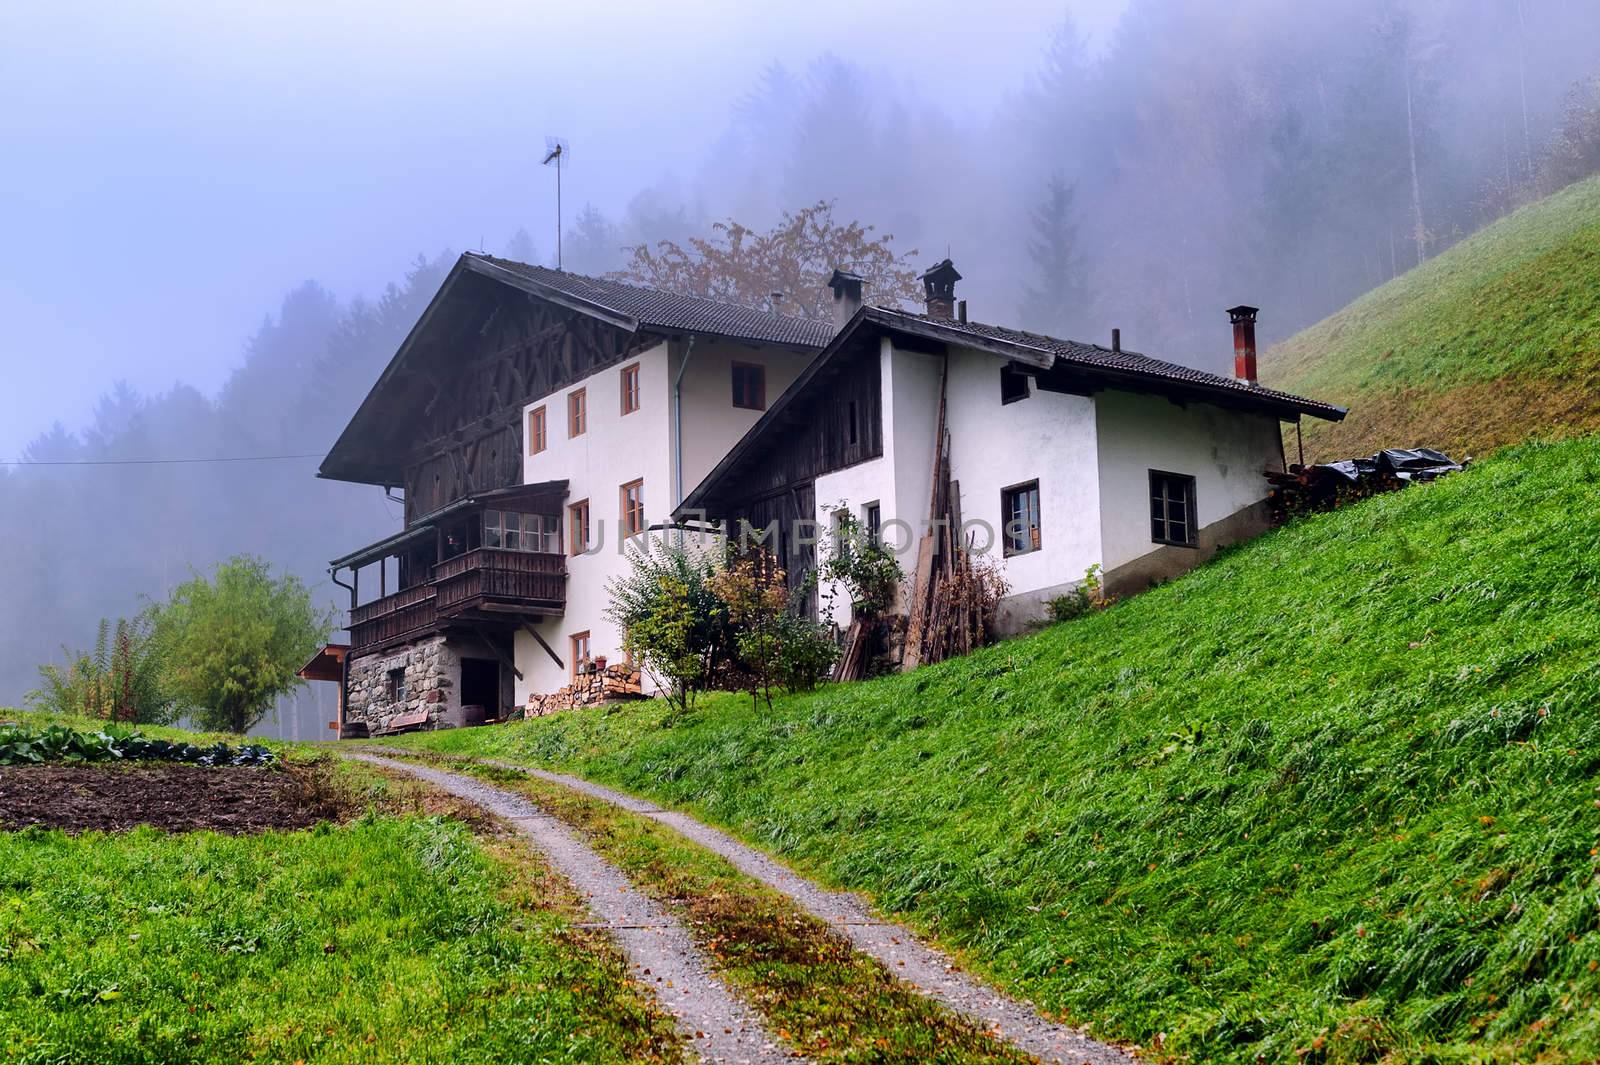 Traditional wooden house in Tyrol, Austria by GlobePhotos